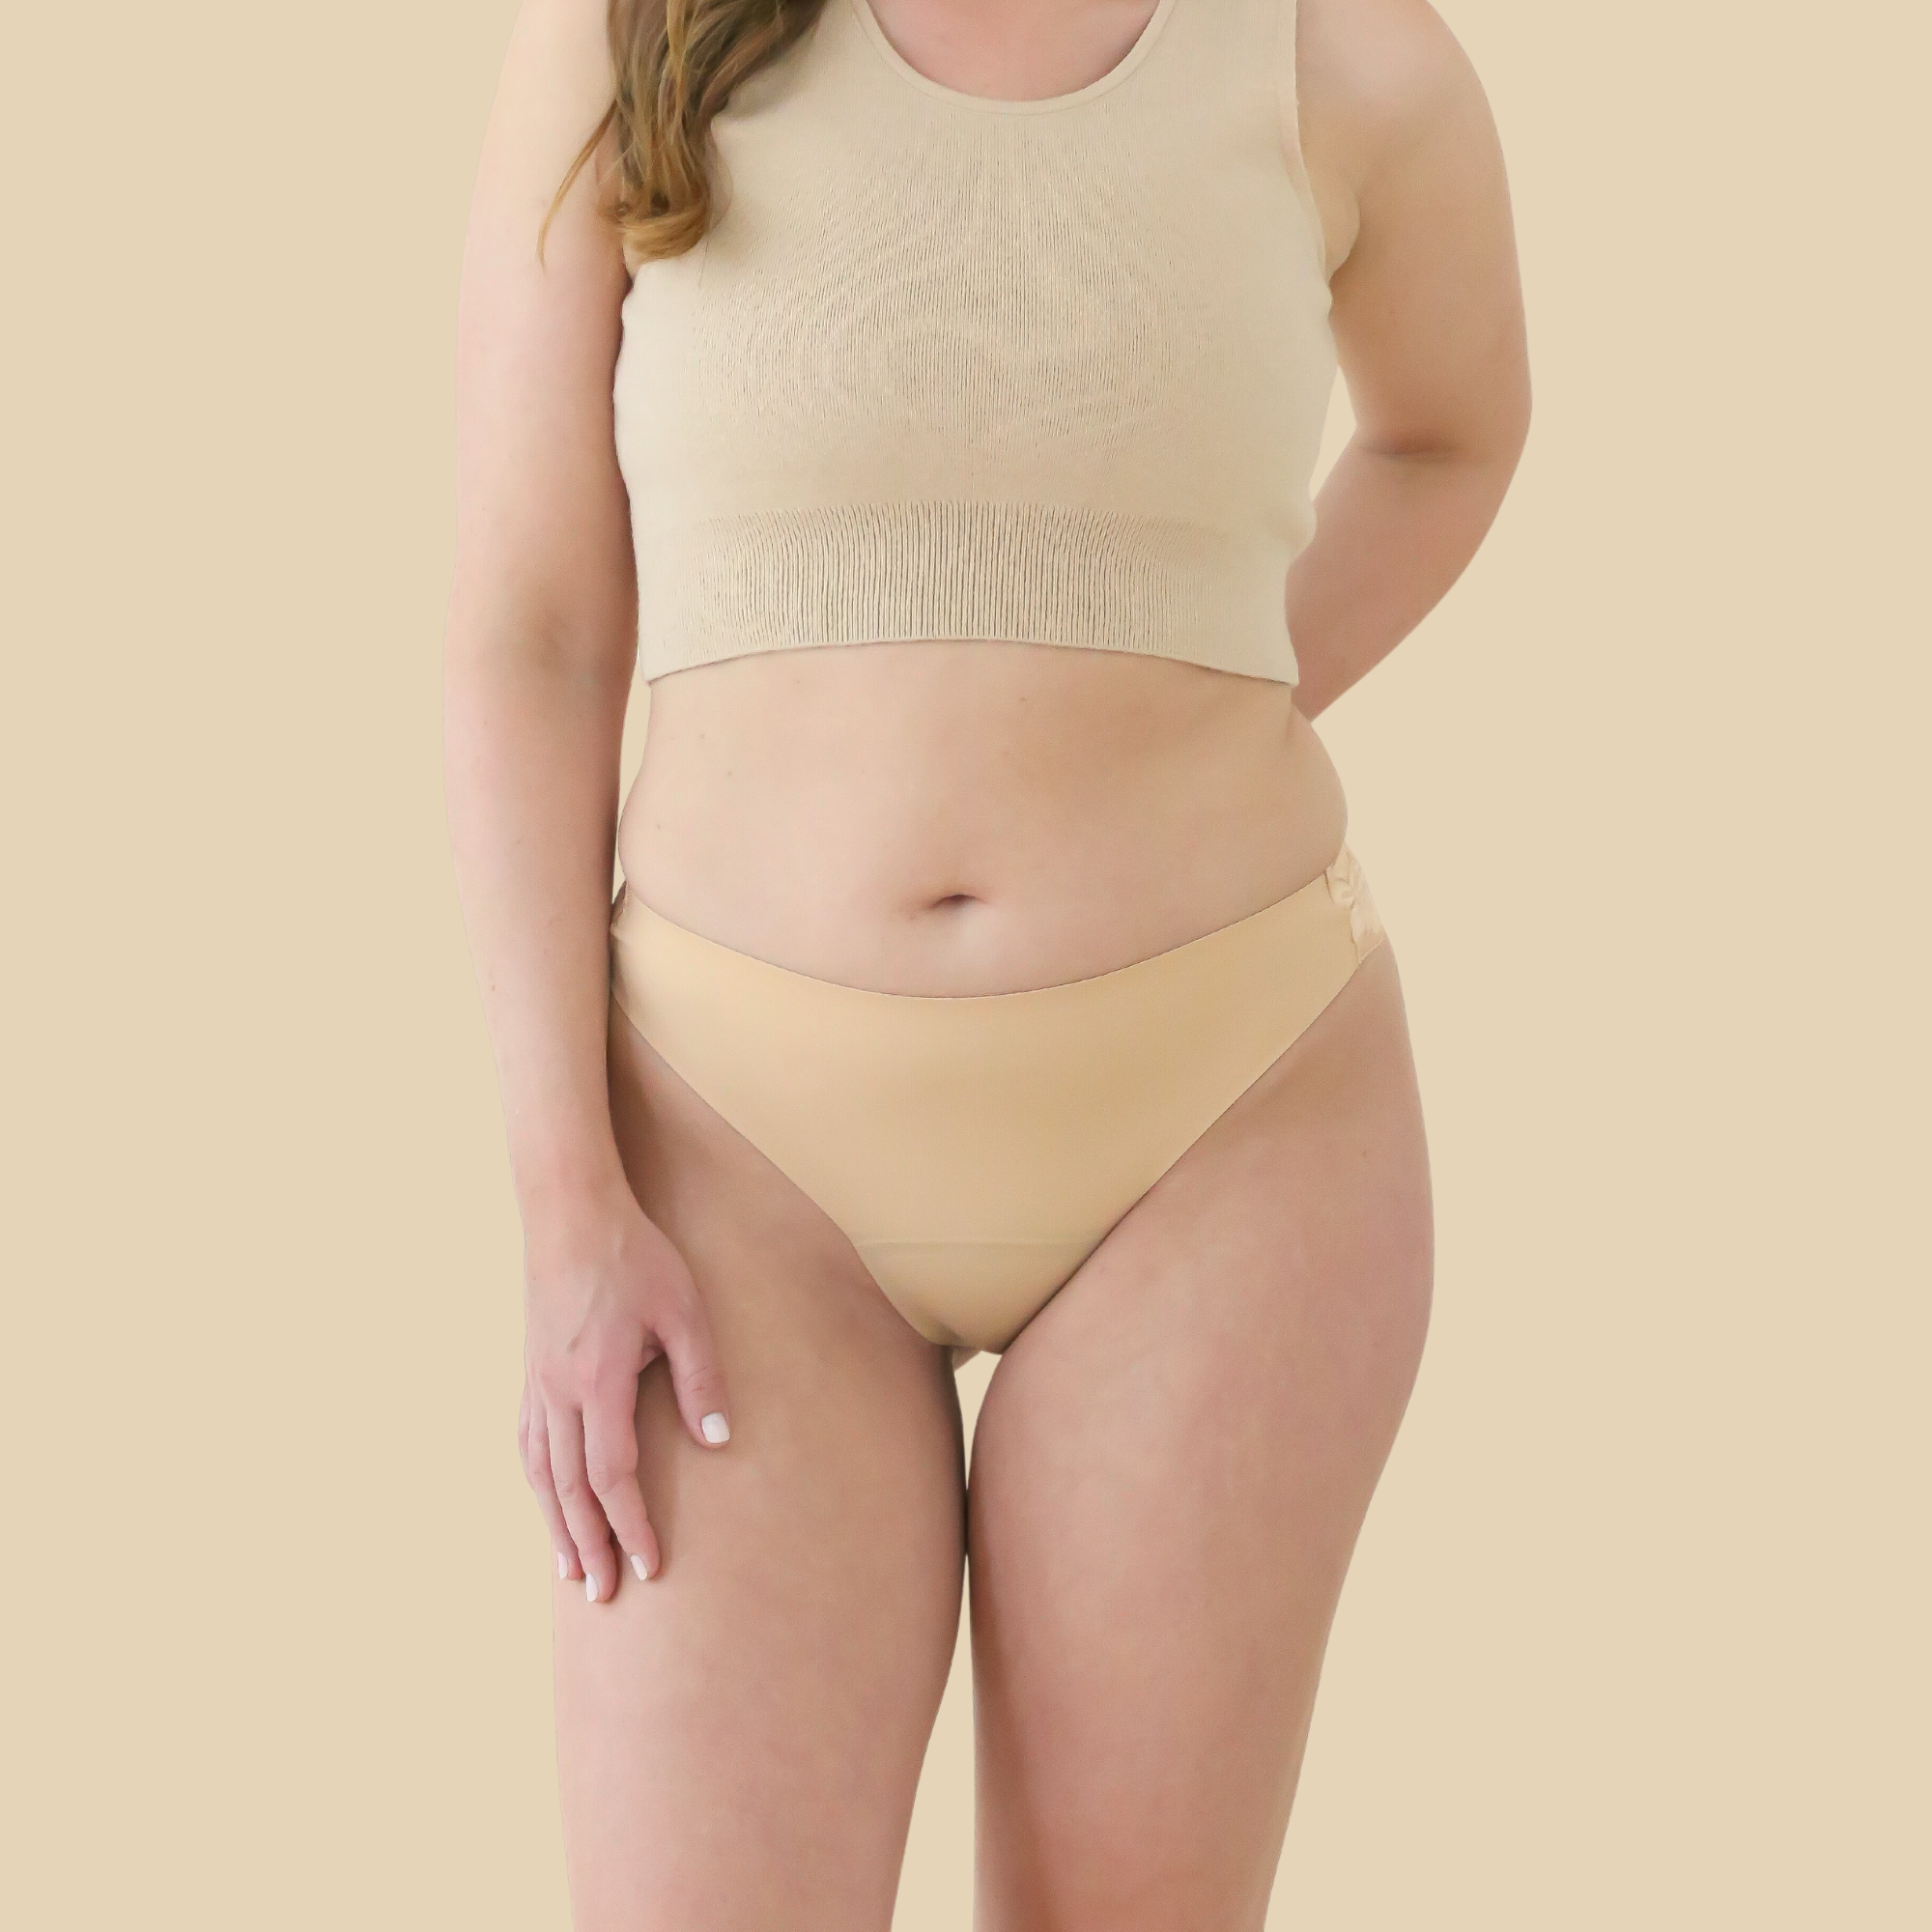 dais daily underwear in brazilian cut with lace in beige colour. Product shown on model from the front. 